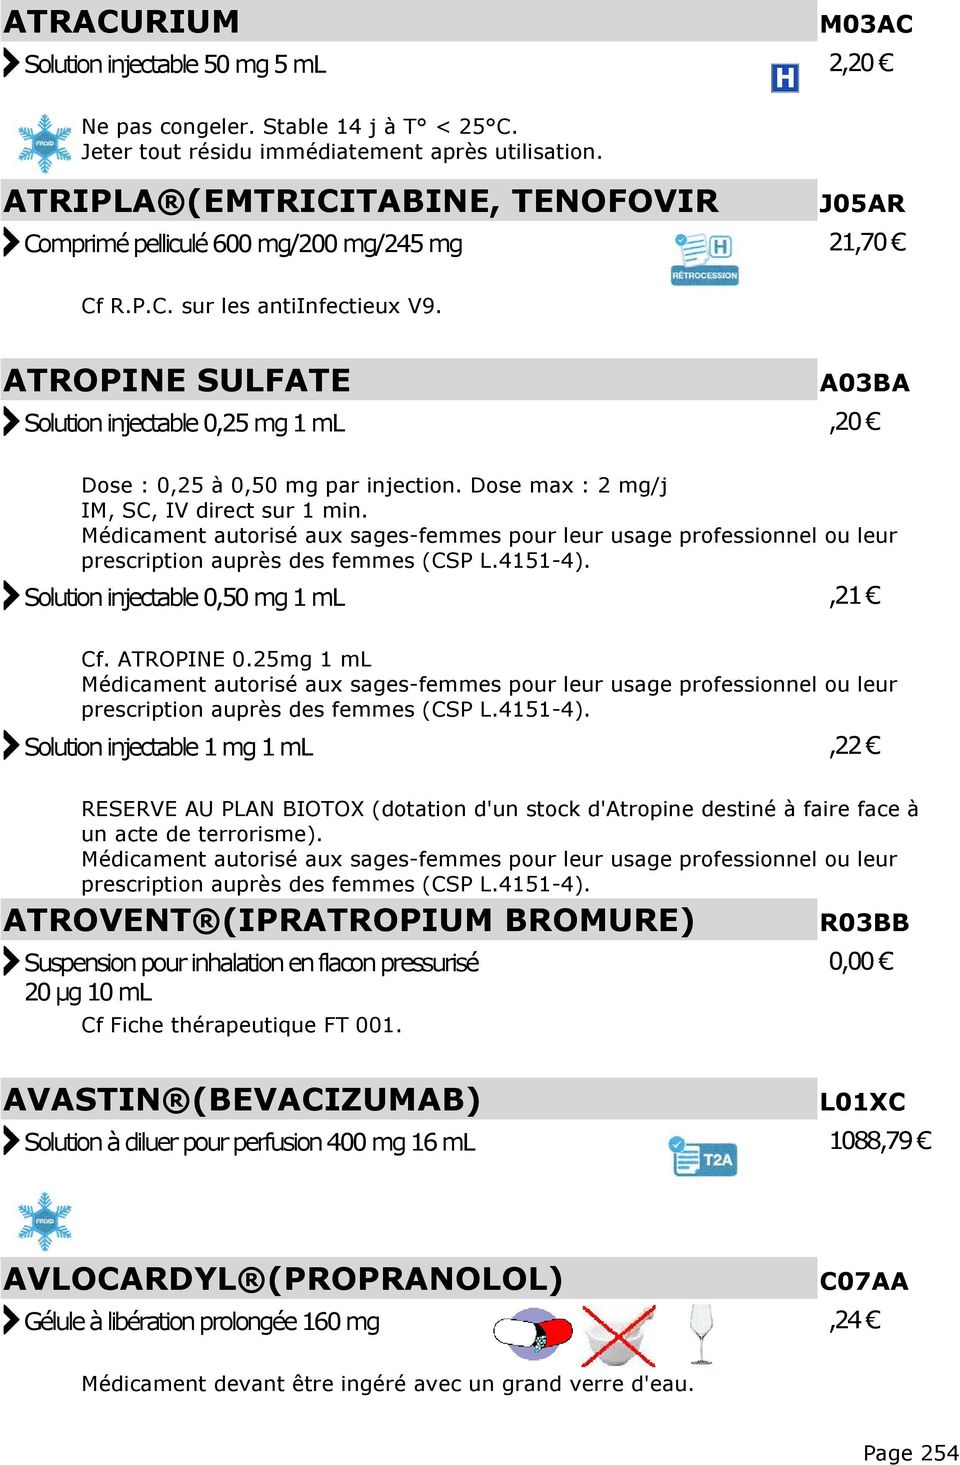 ATROPINE SULFATE A03BA Solution injectable 0,25 mg 1 ml,20 Dose : 0,25 à 0,50 mg par injection. Dose max : 2 mg/j IM, SC, IV direct sur 1 min. Solution injectable 0,50 mg 1 ml,21 Cf. ATROPINE 0.